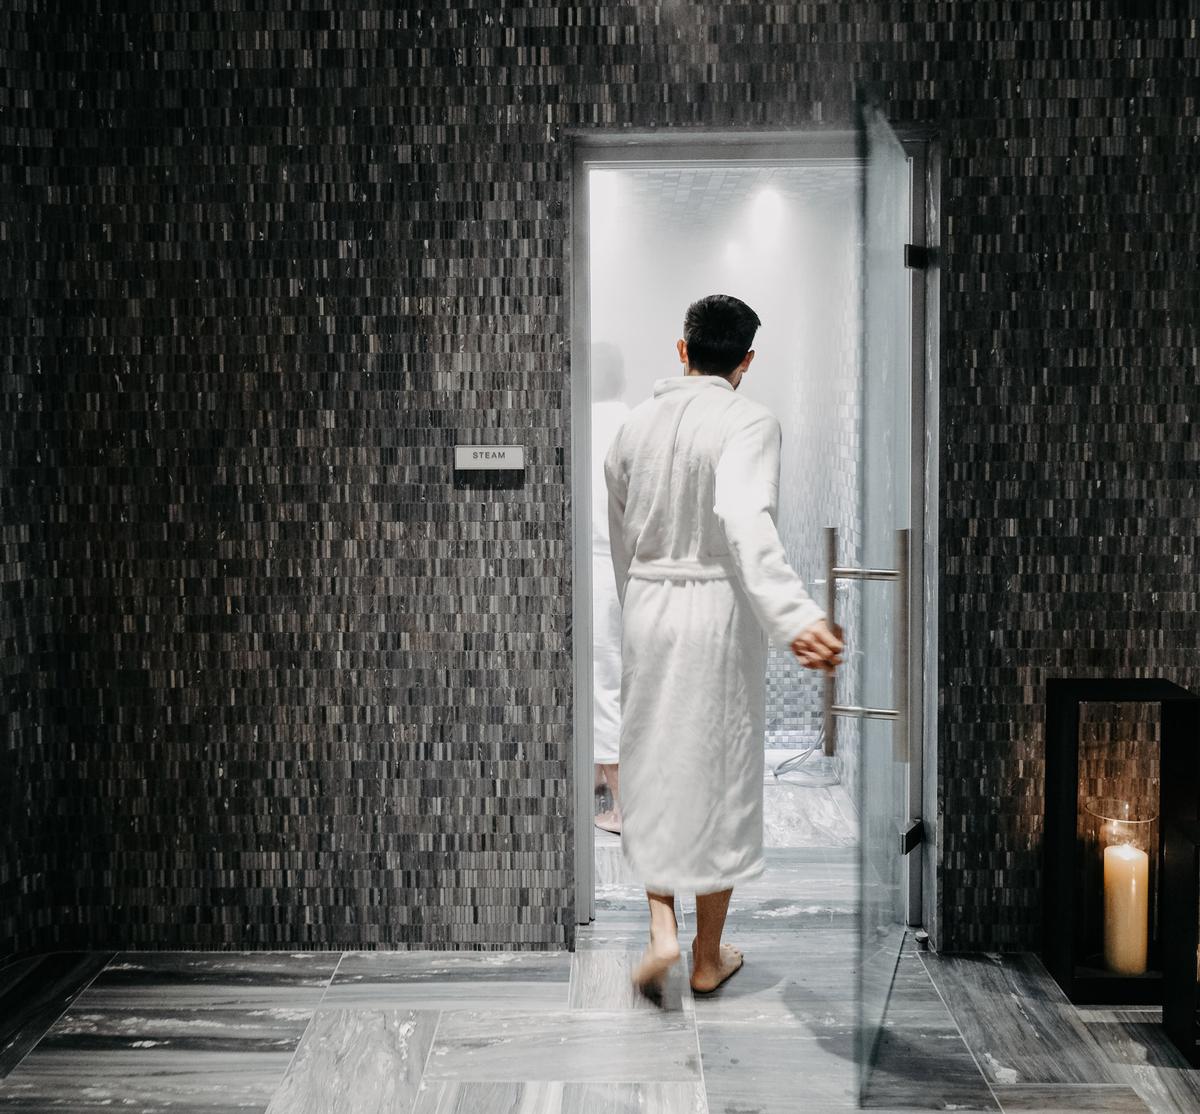 The spa has been realised to reinvent traditional spa culture and support the hotel's wider mission to enhance the wellbeing of all its guests / 